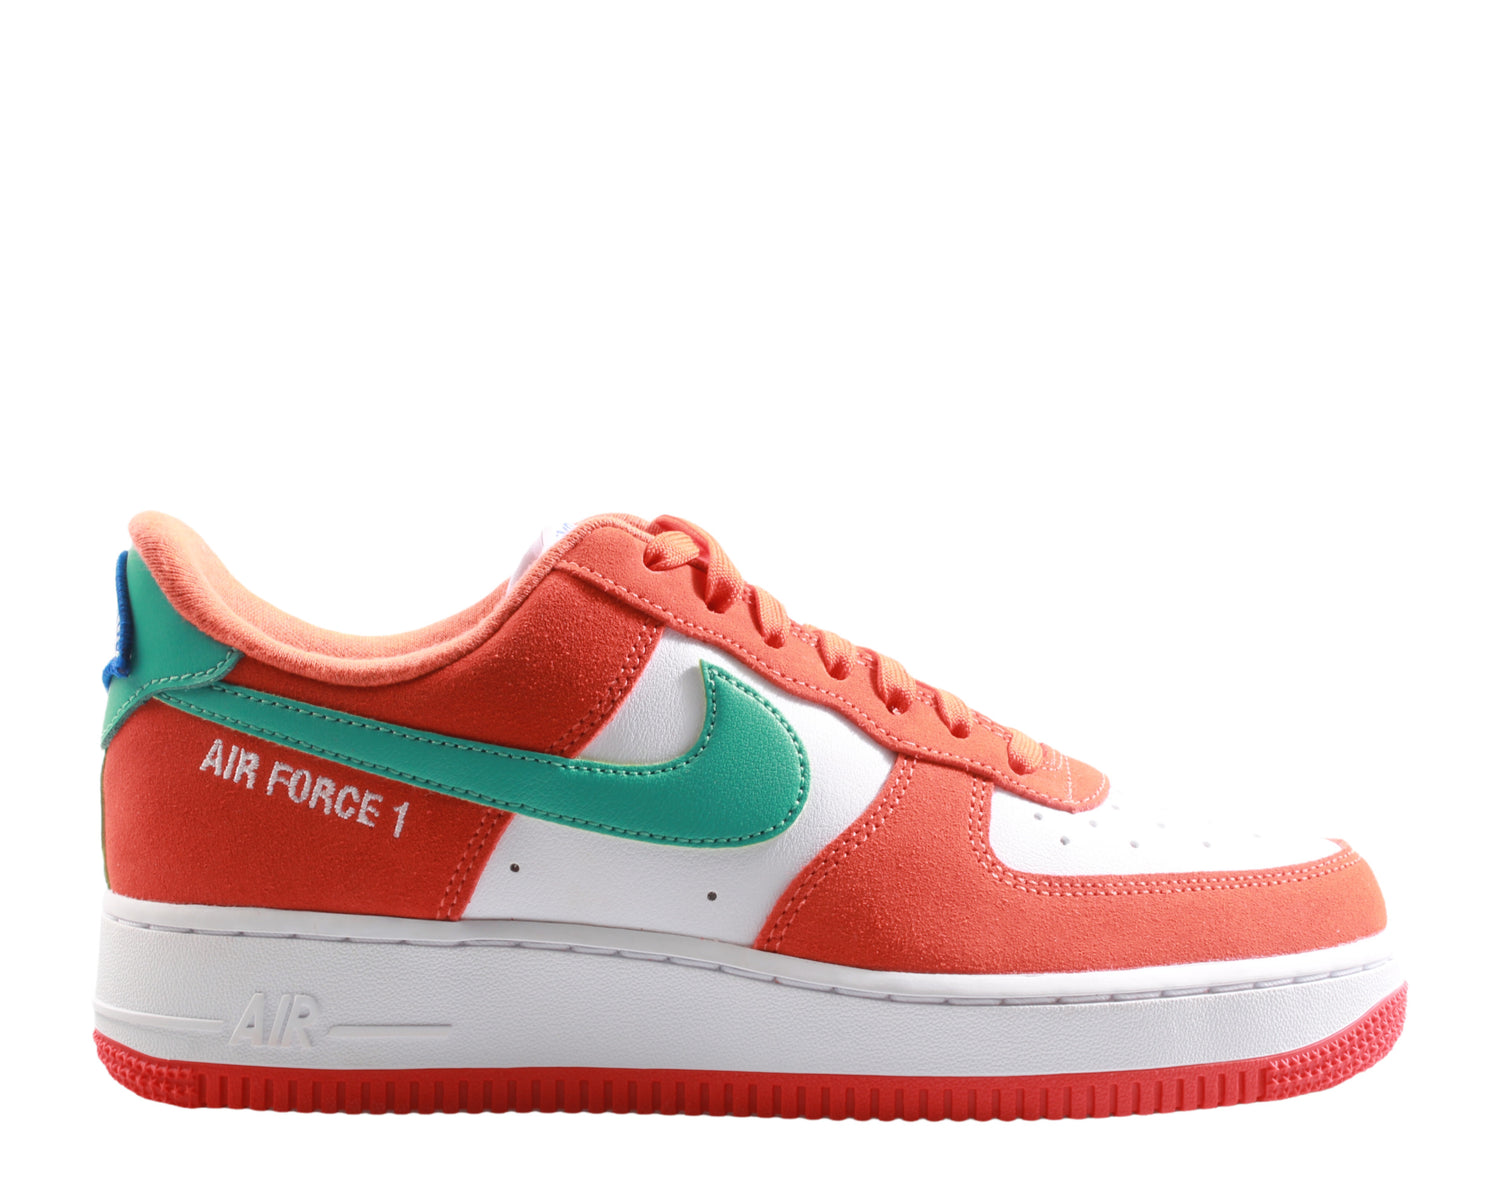 Nike Air Force 1 '07 LV8 Athletic Club Men's Basketball Shoes